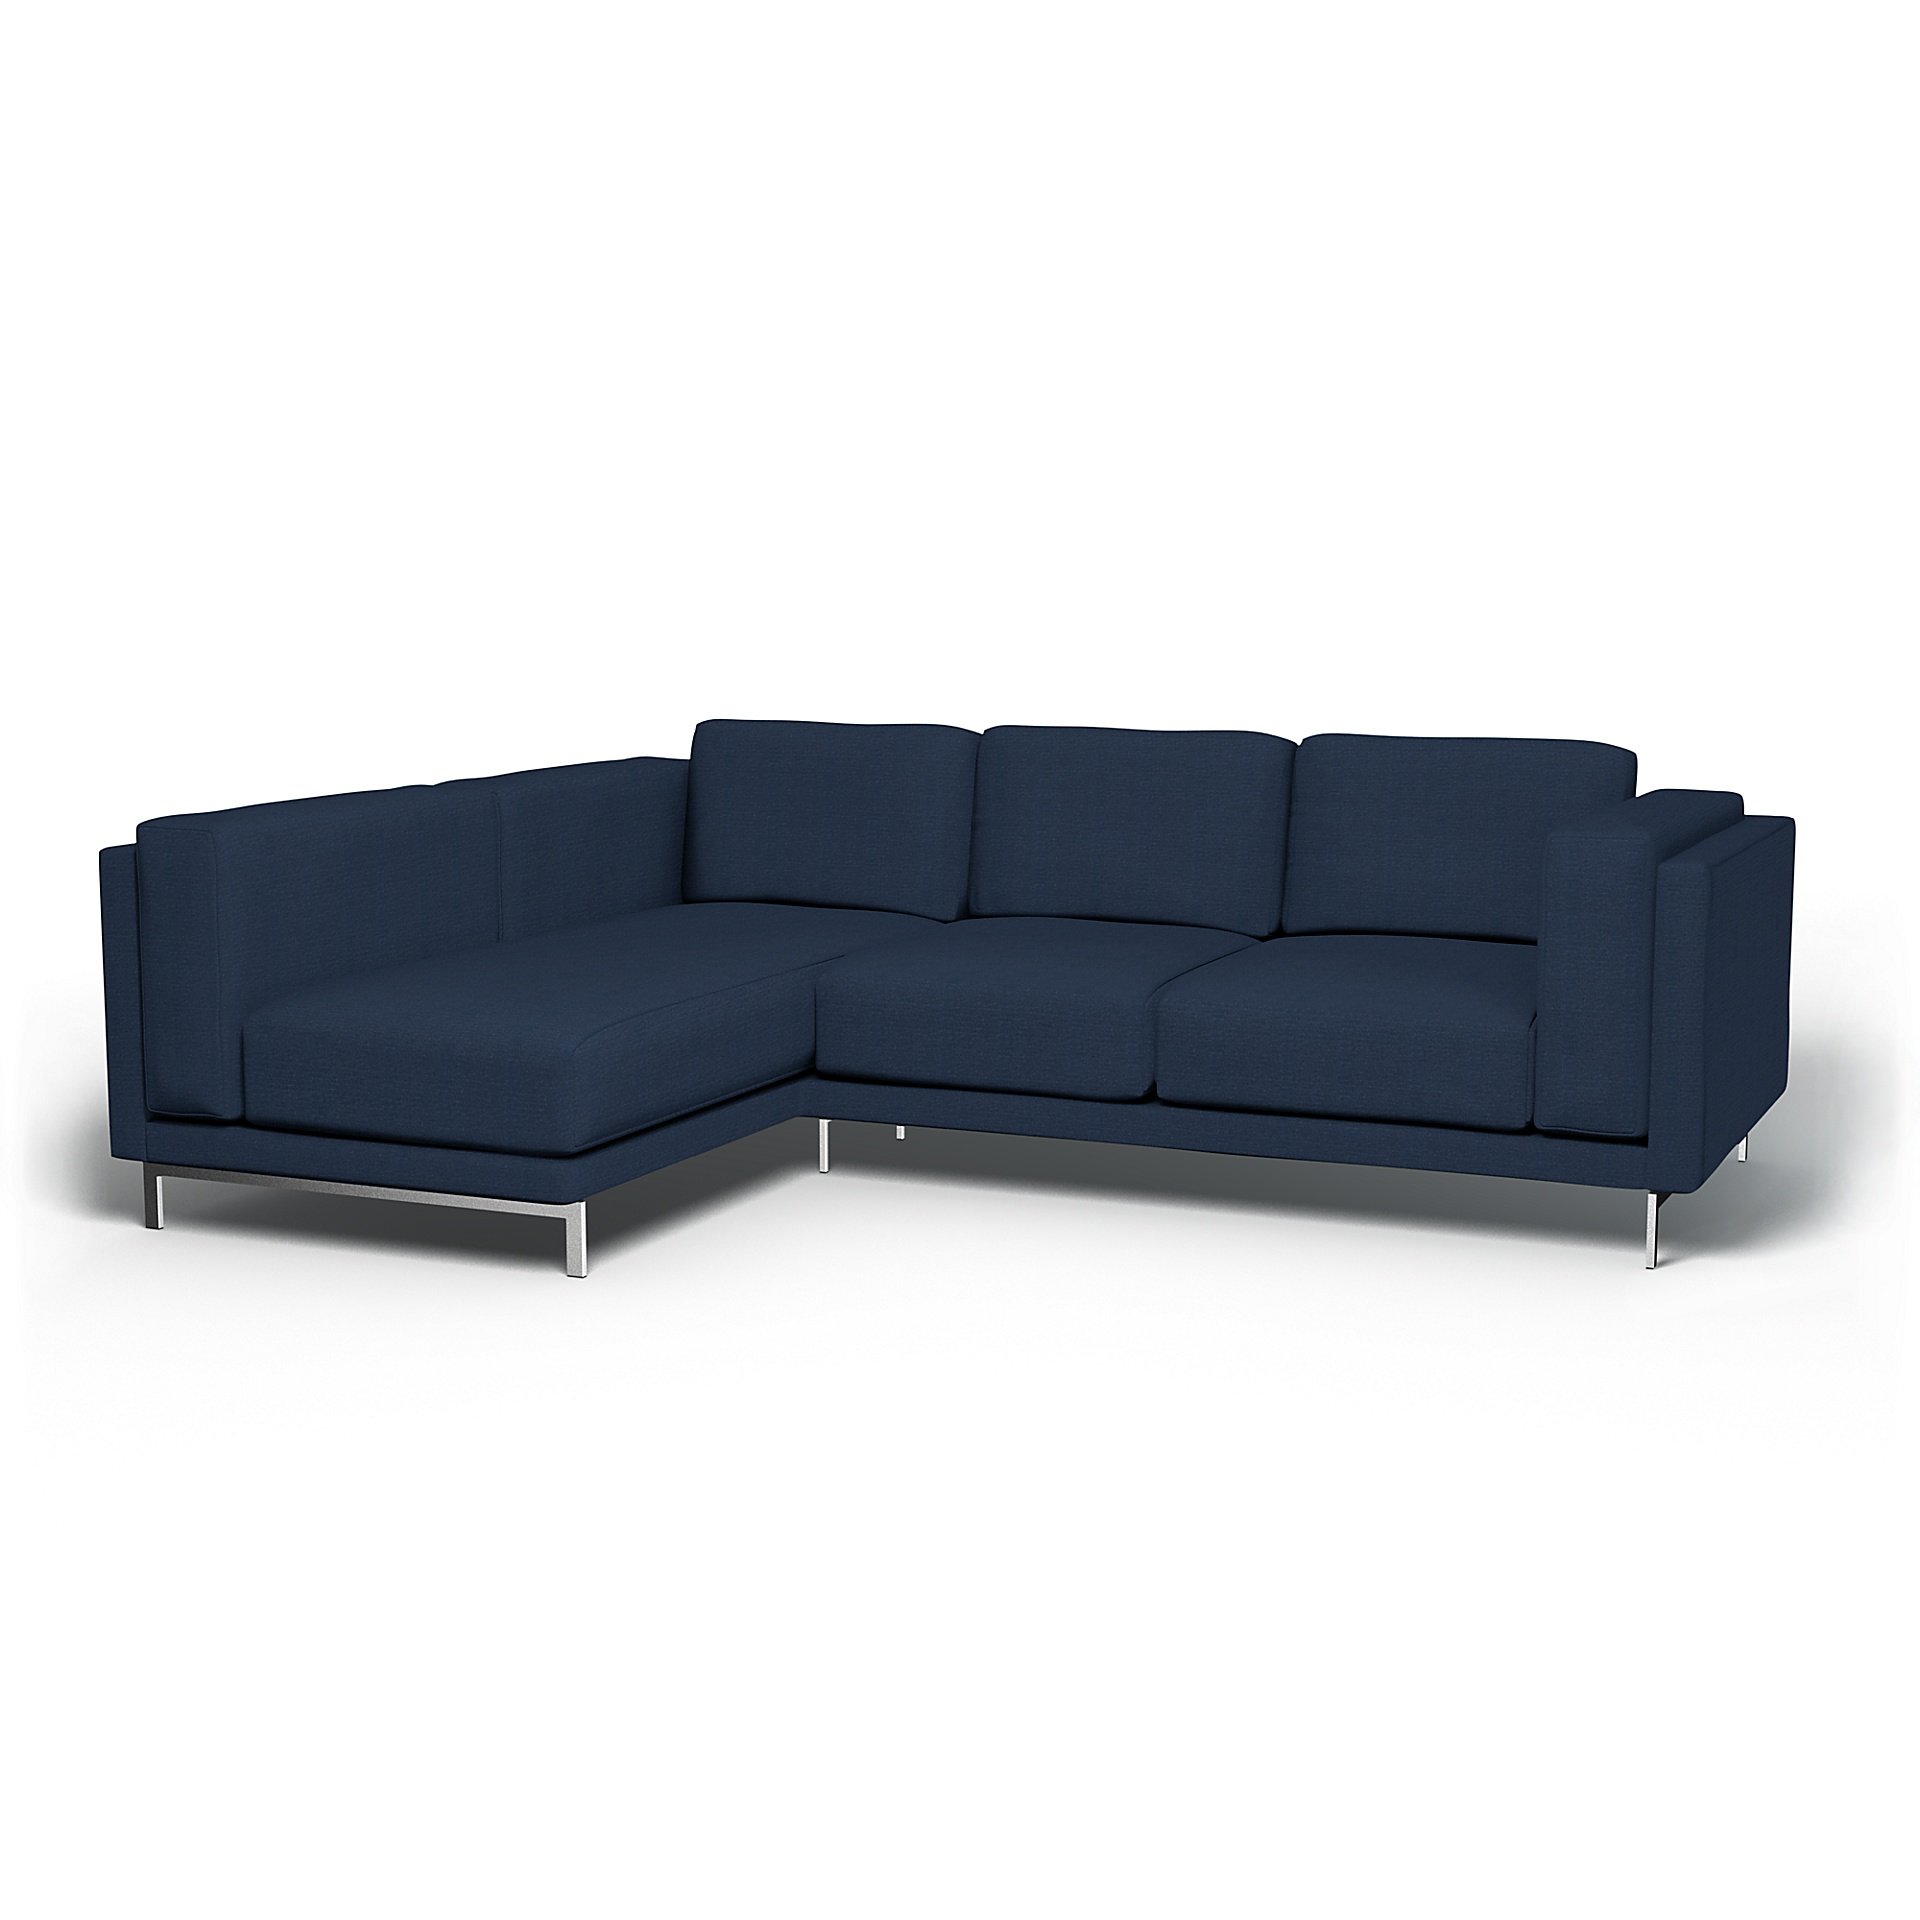 IKEA - Nockeby 3 Seater Sofa with Left Chaise Cover, Navy Blue, Linen - Bemz